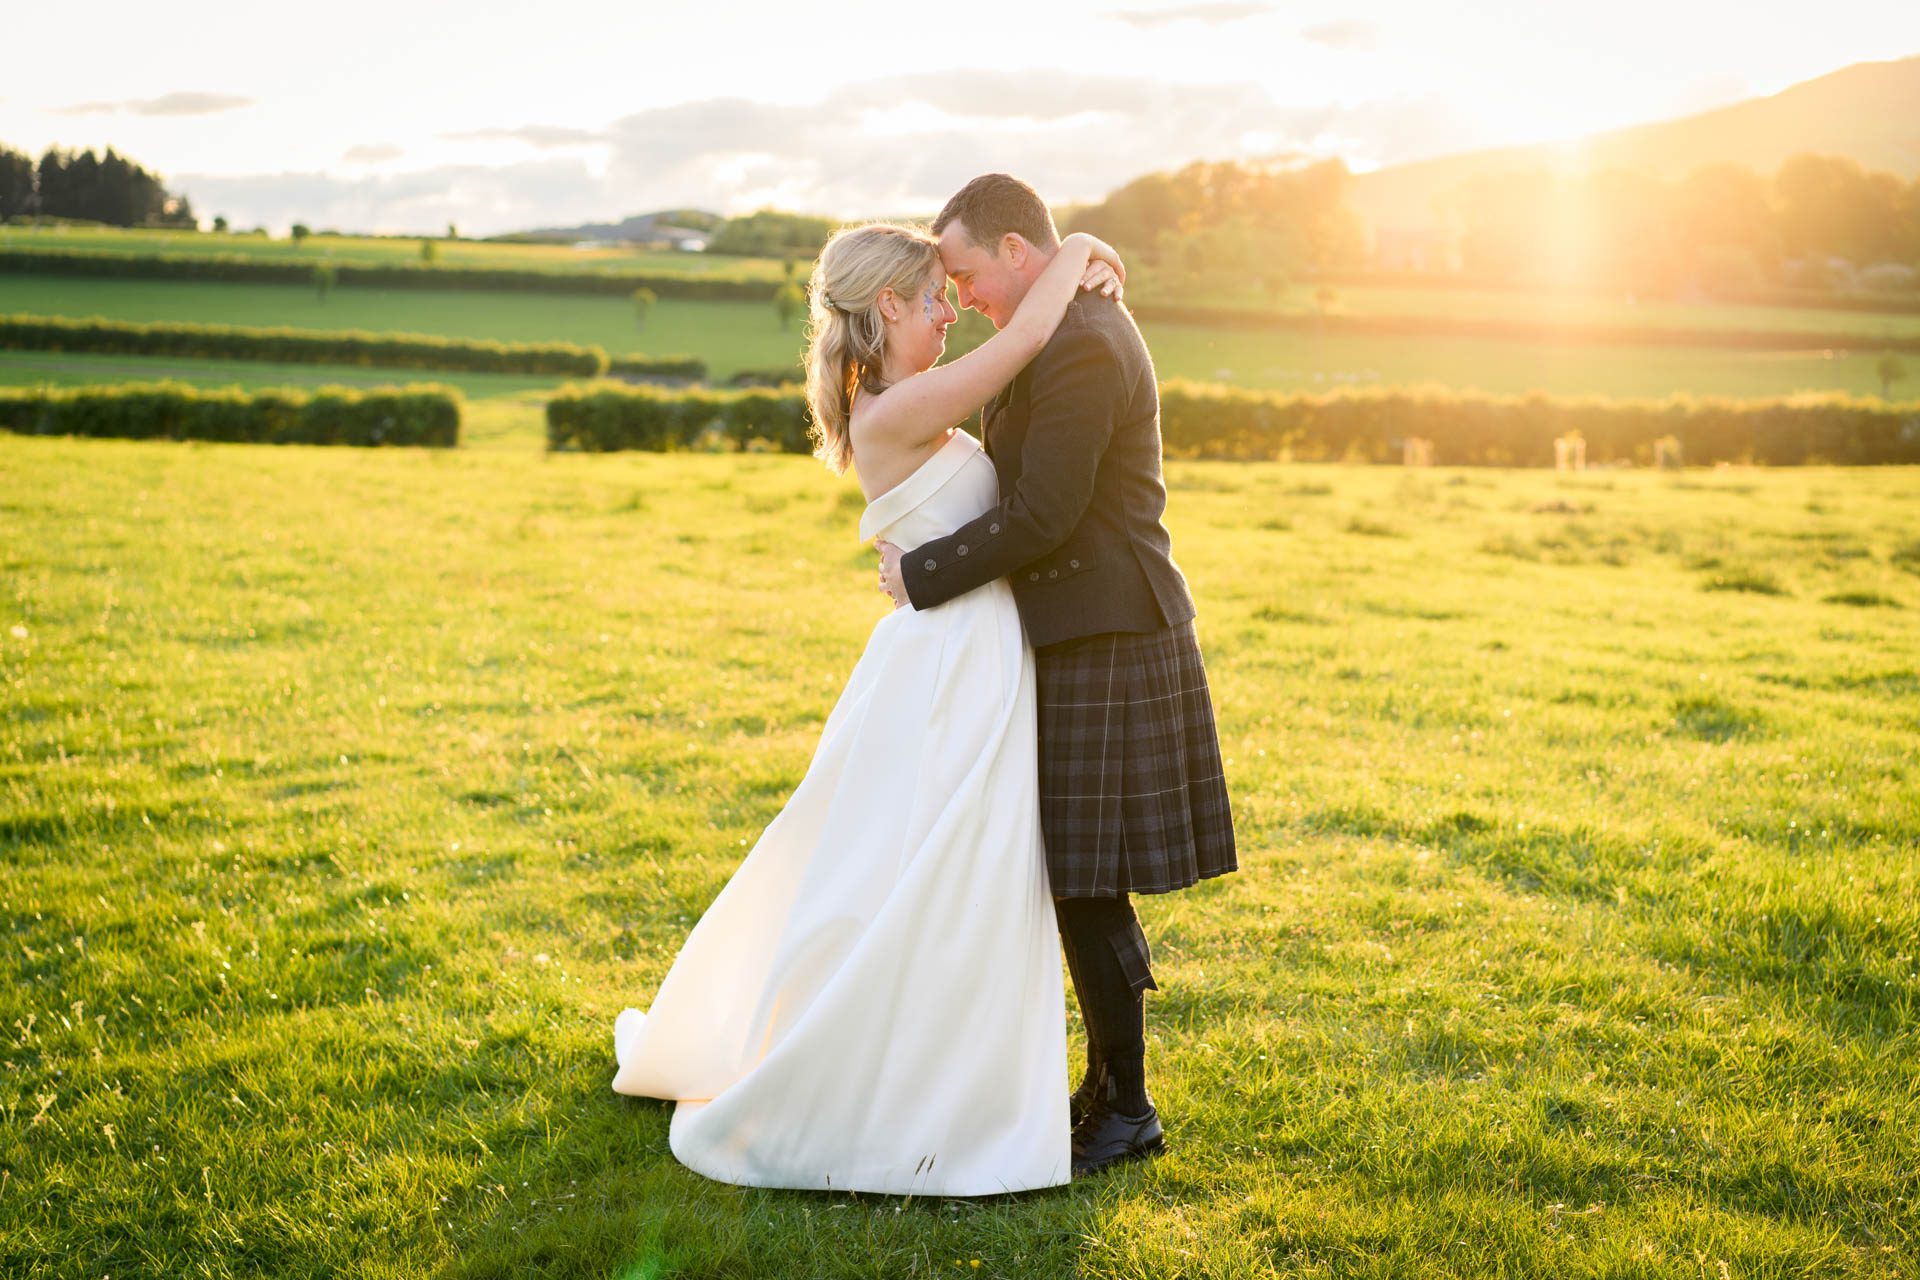 Golden hour wedding portrait of Hollie and Colin at their Scottish Borders wedding